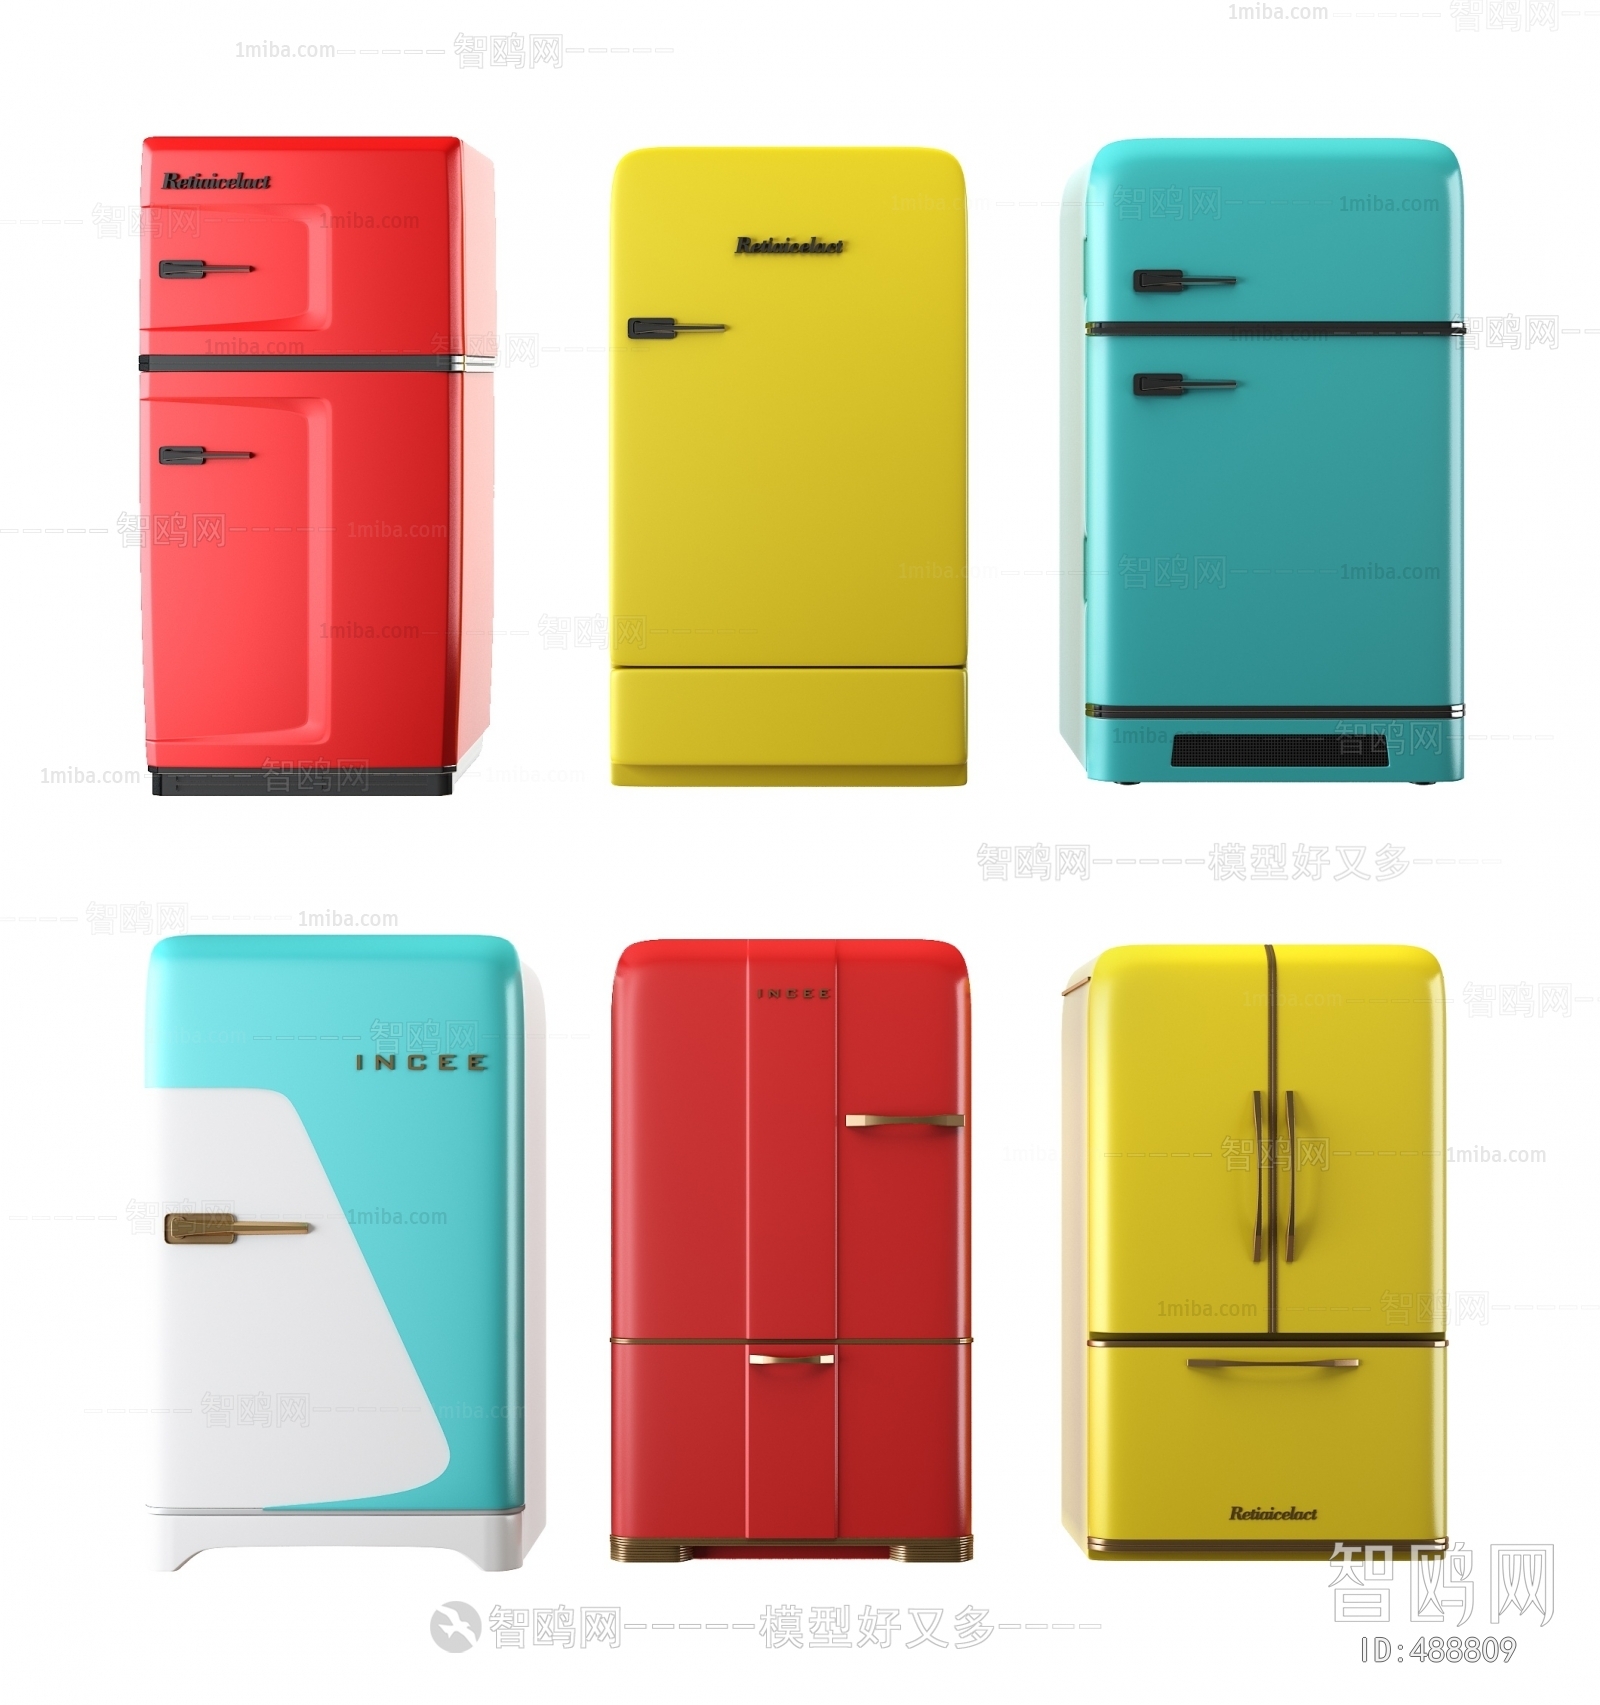 Modern Nordic Style Home Appliance Refrigerator